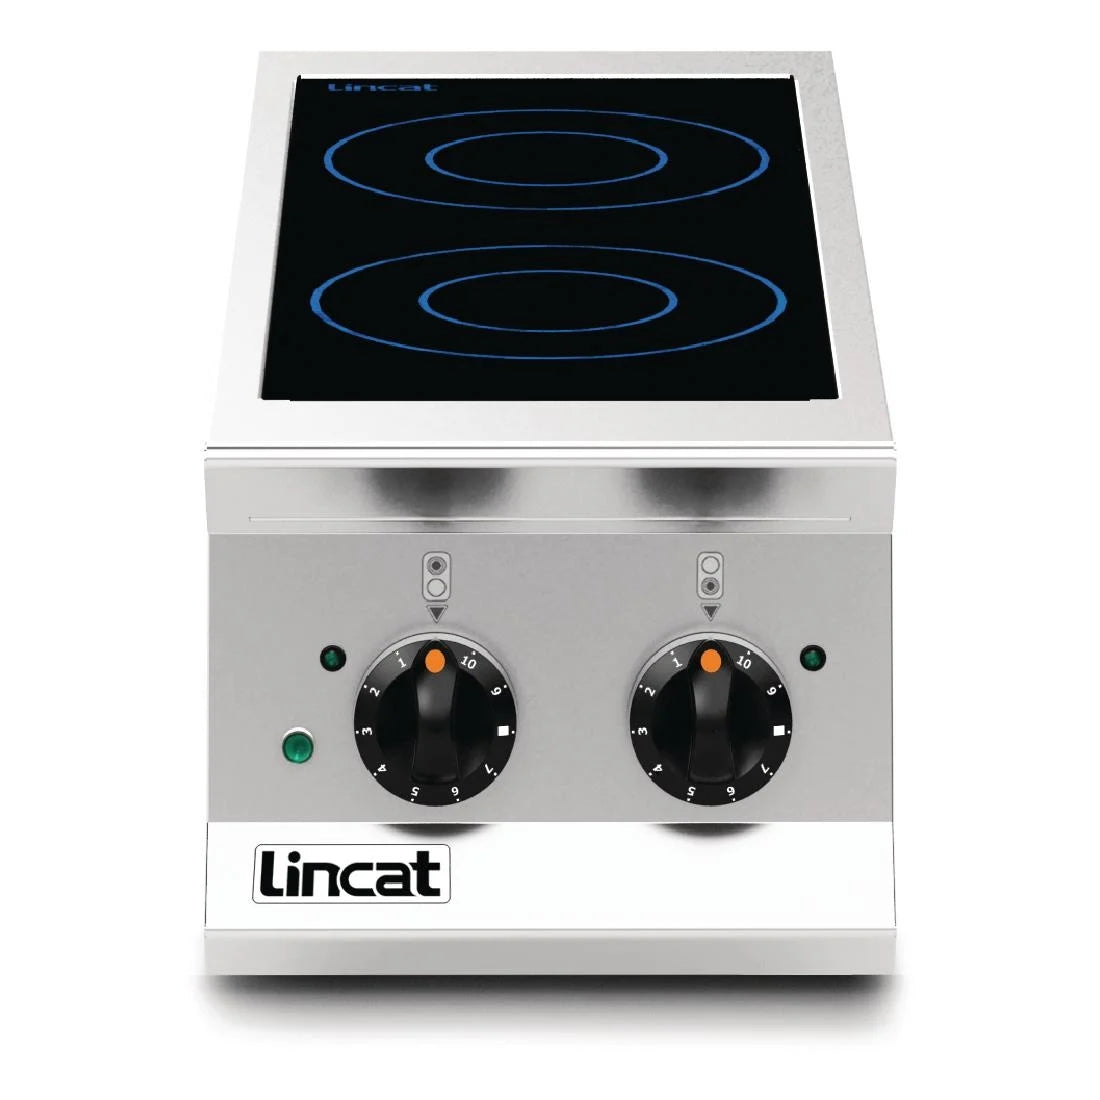 Lincat Opus 800 Twin Induction Hob OE8013.Product Ref:00712.Model: DM516. 🚚 3-5 Days Delivery